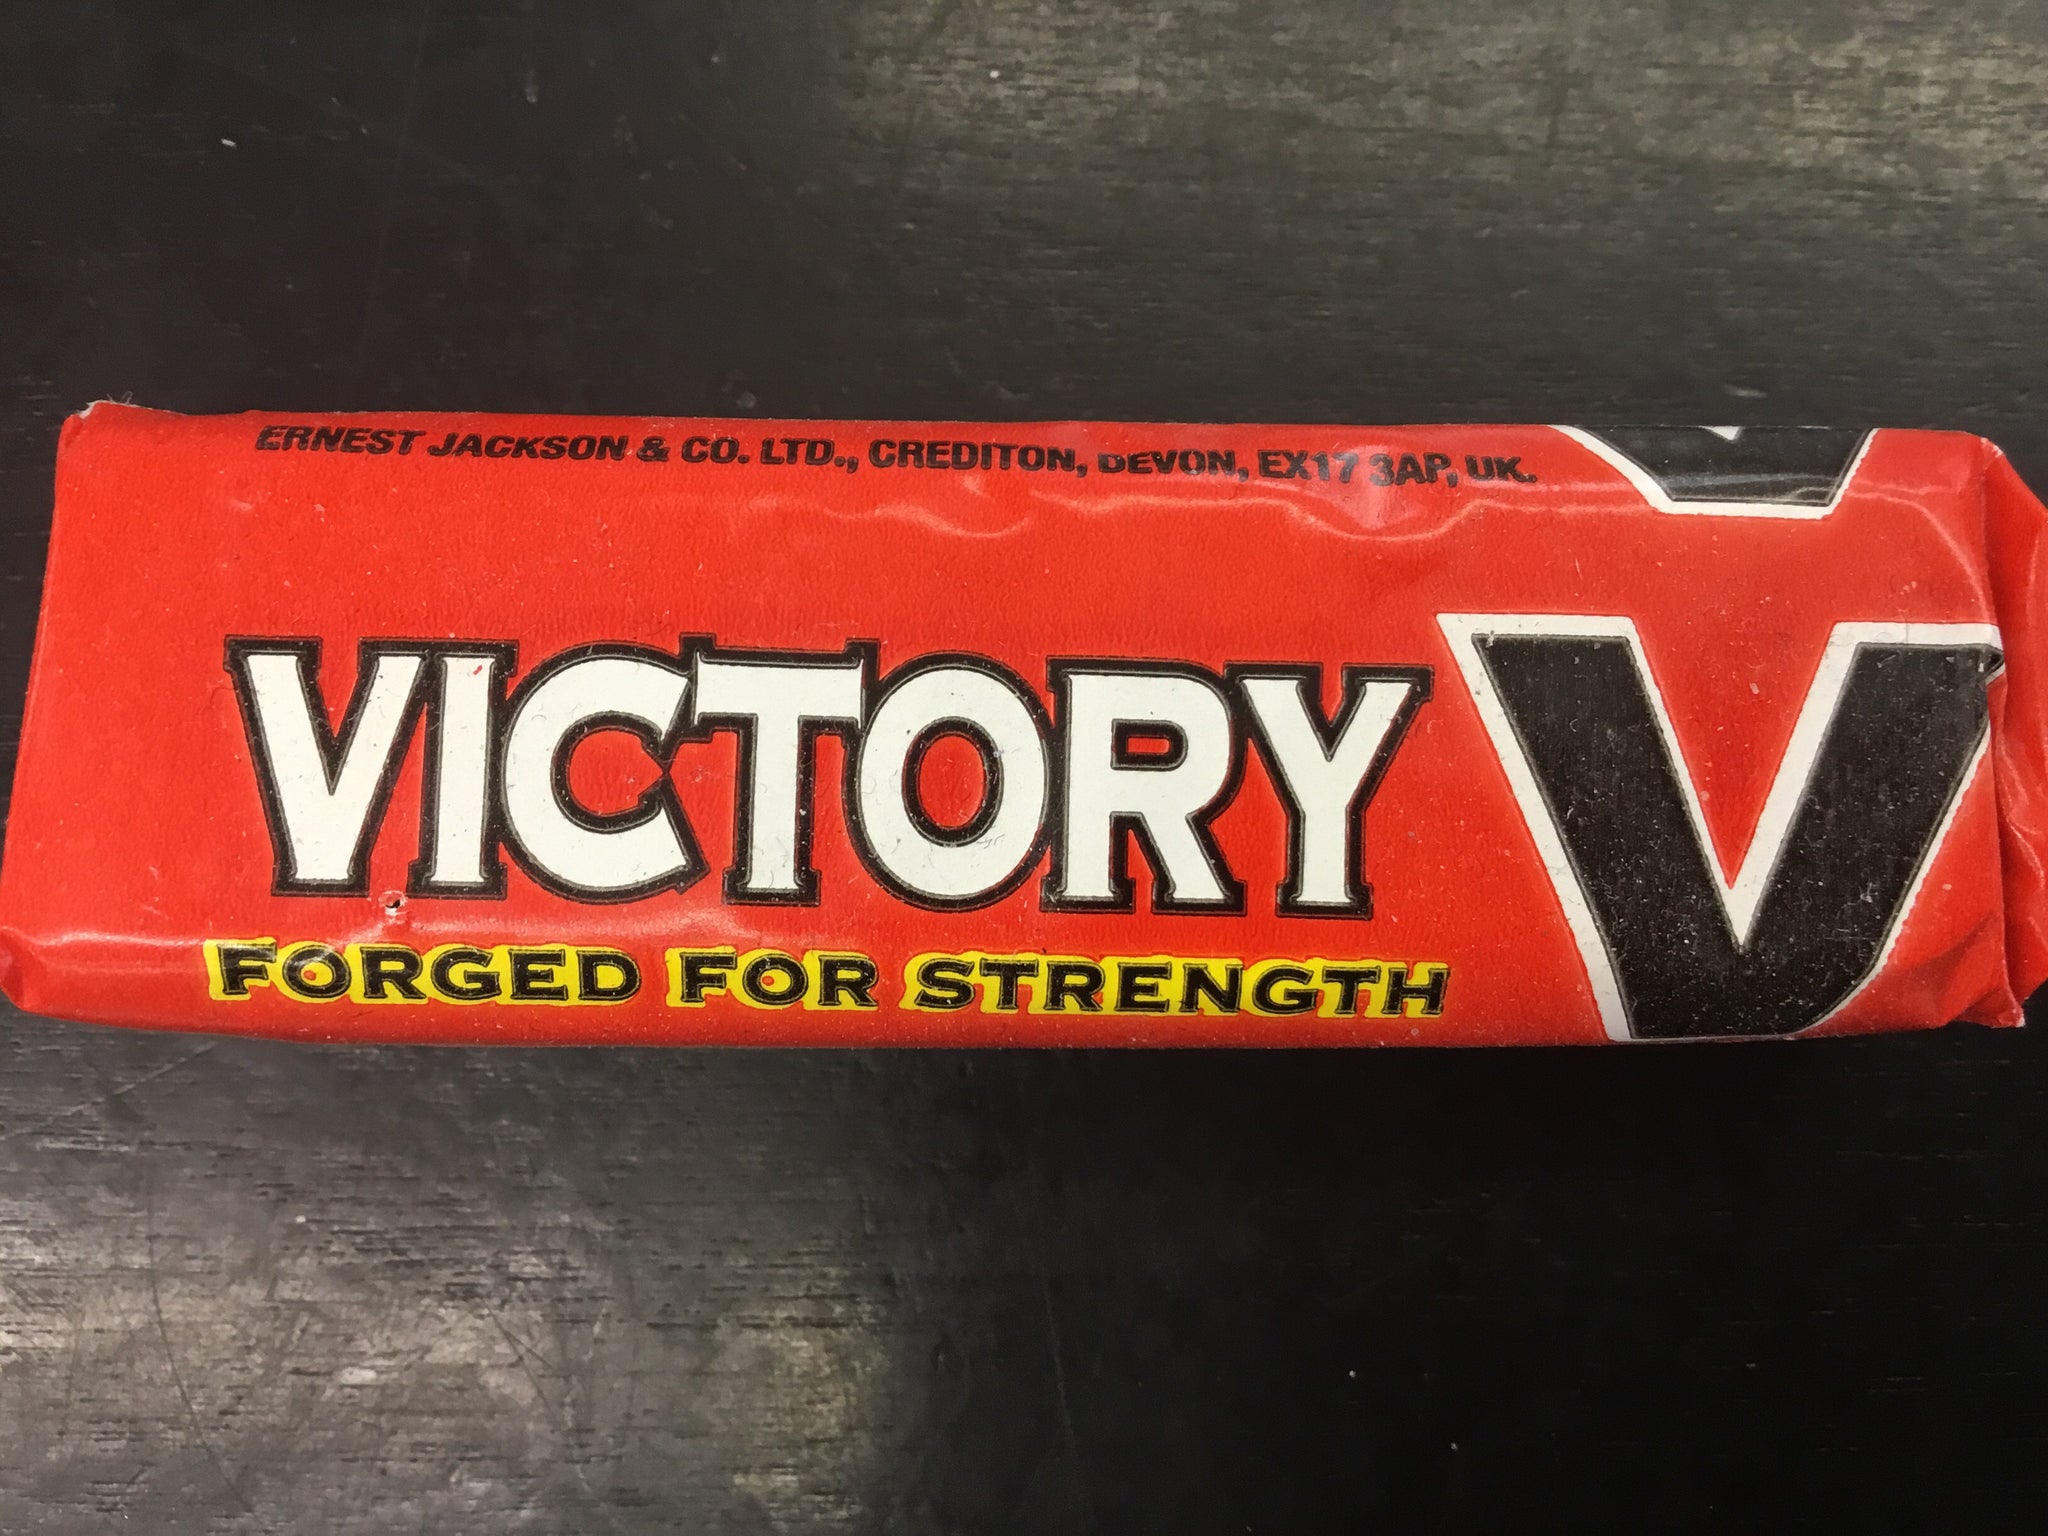 Victory (Forged for strength)